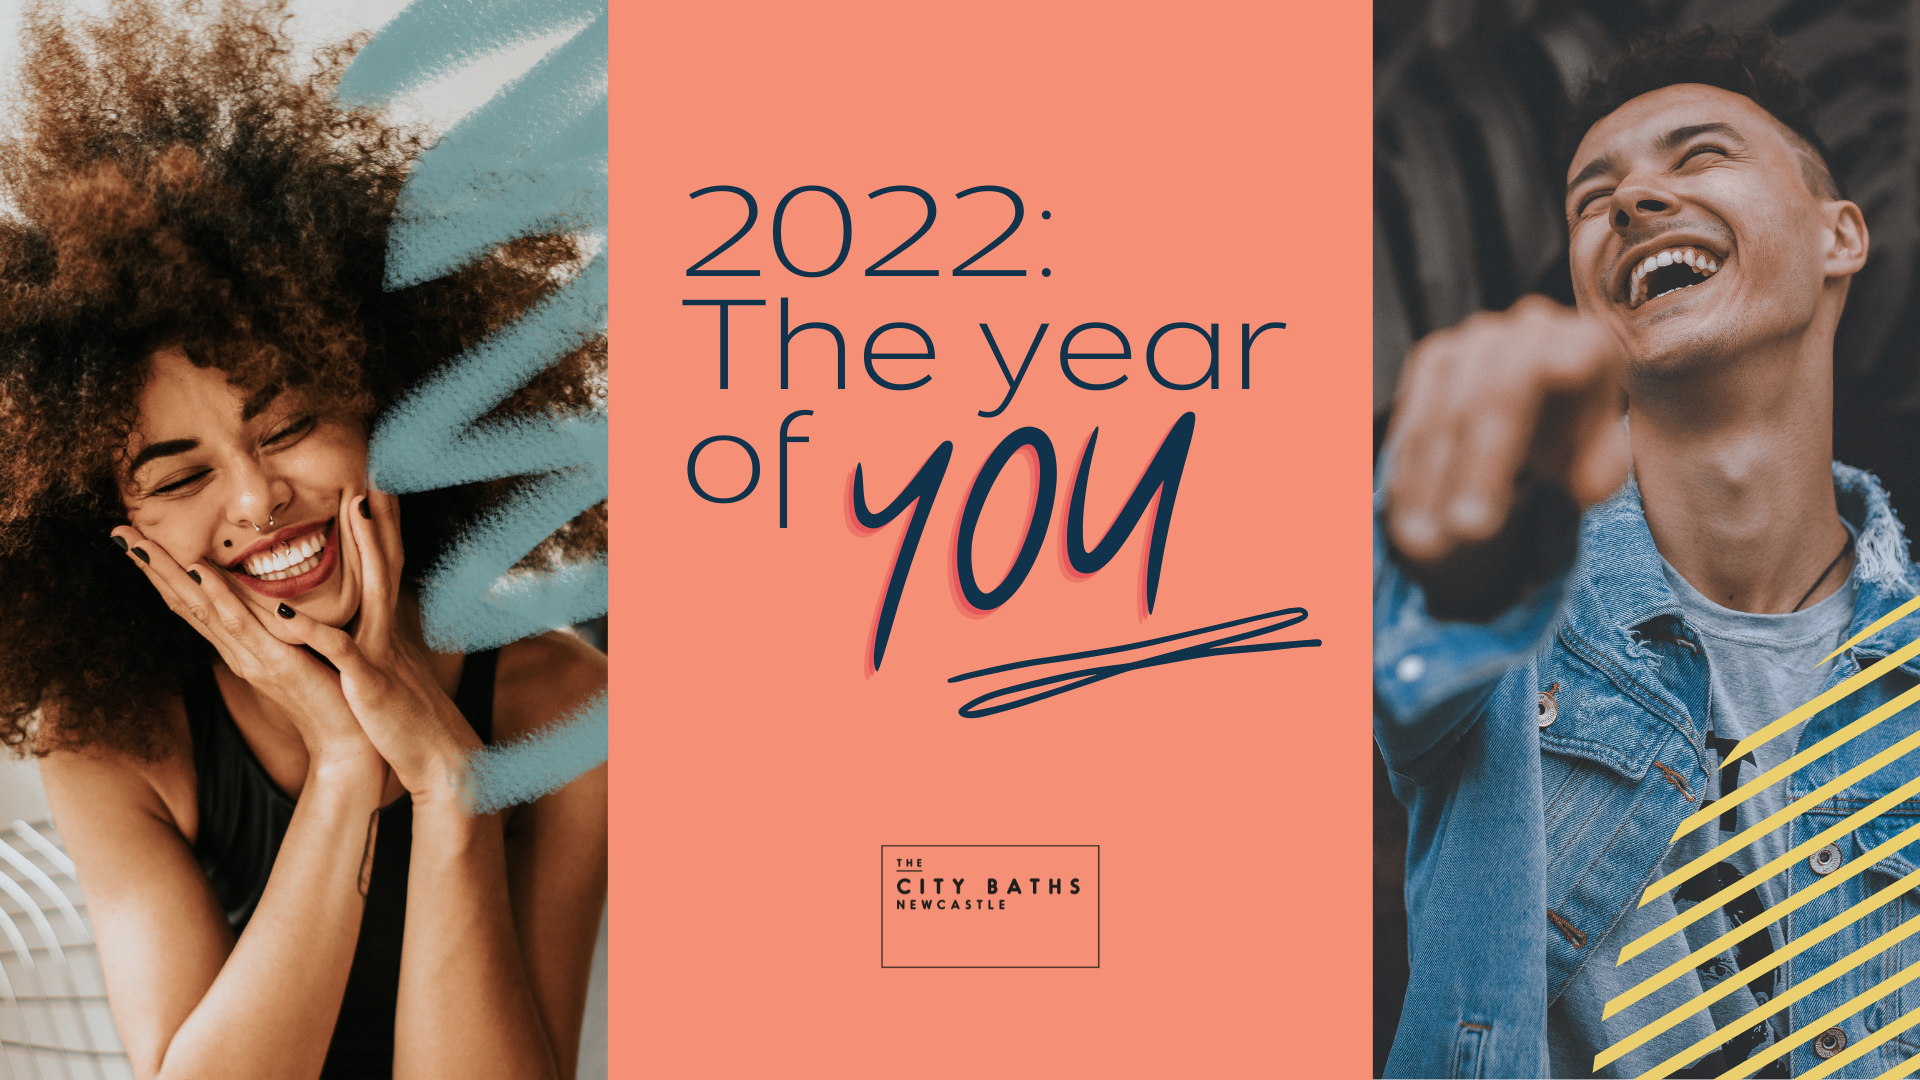 2022: THE YEAR OF YOU